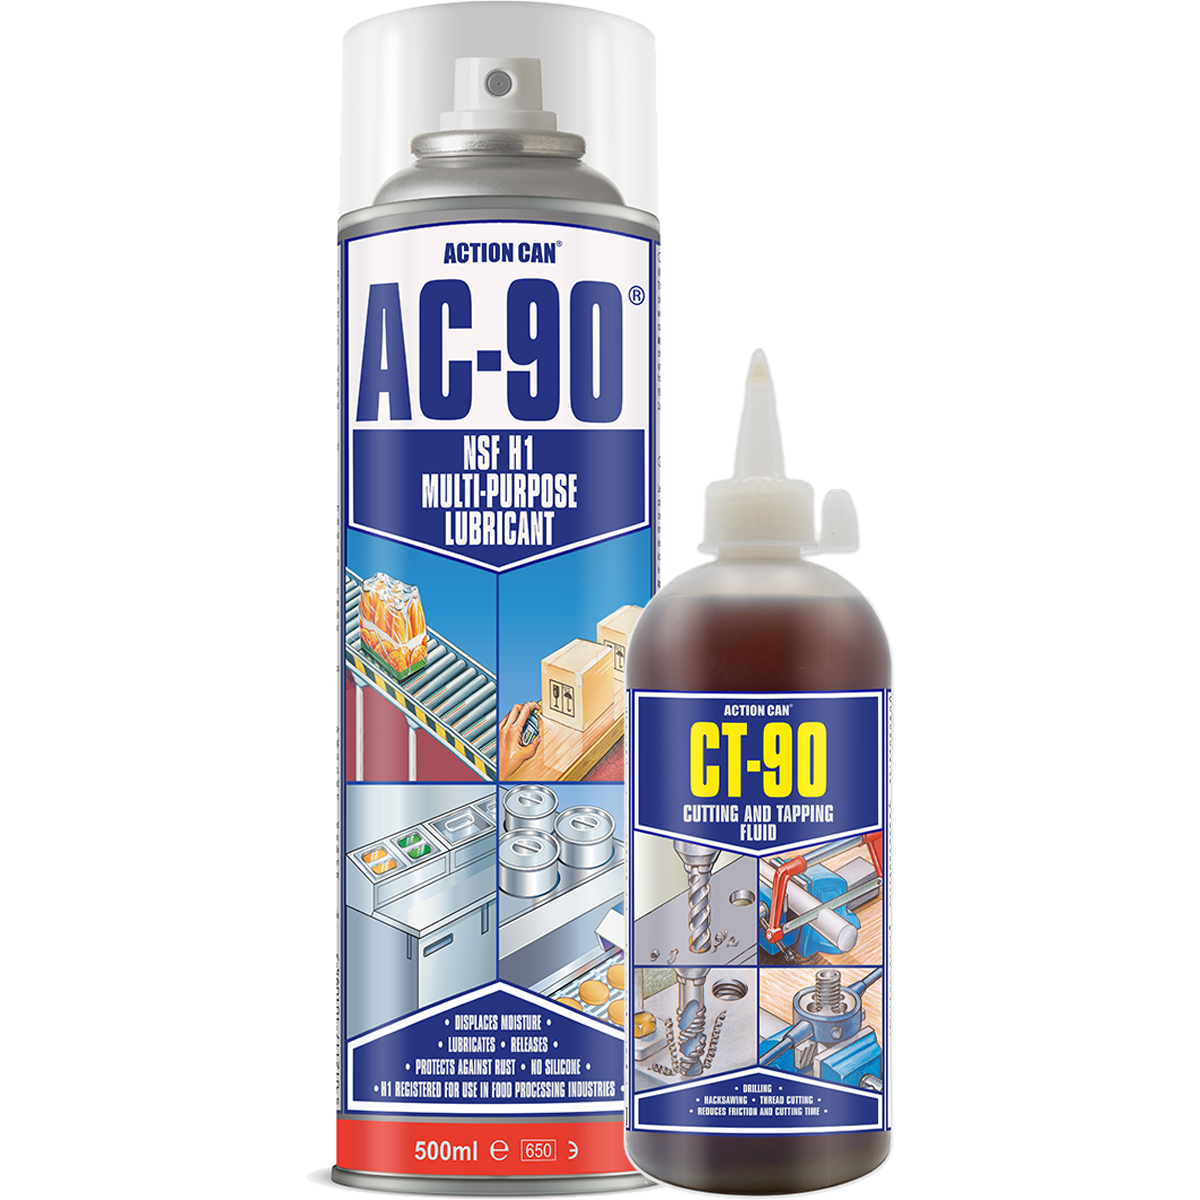 Spray lubrifiant et débloquant 500 ml CRC SILICONE 31262-AA - Conrad  Electronic France